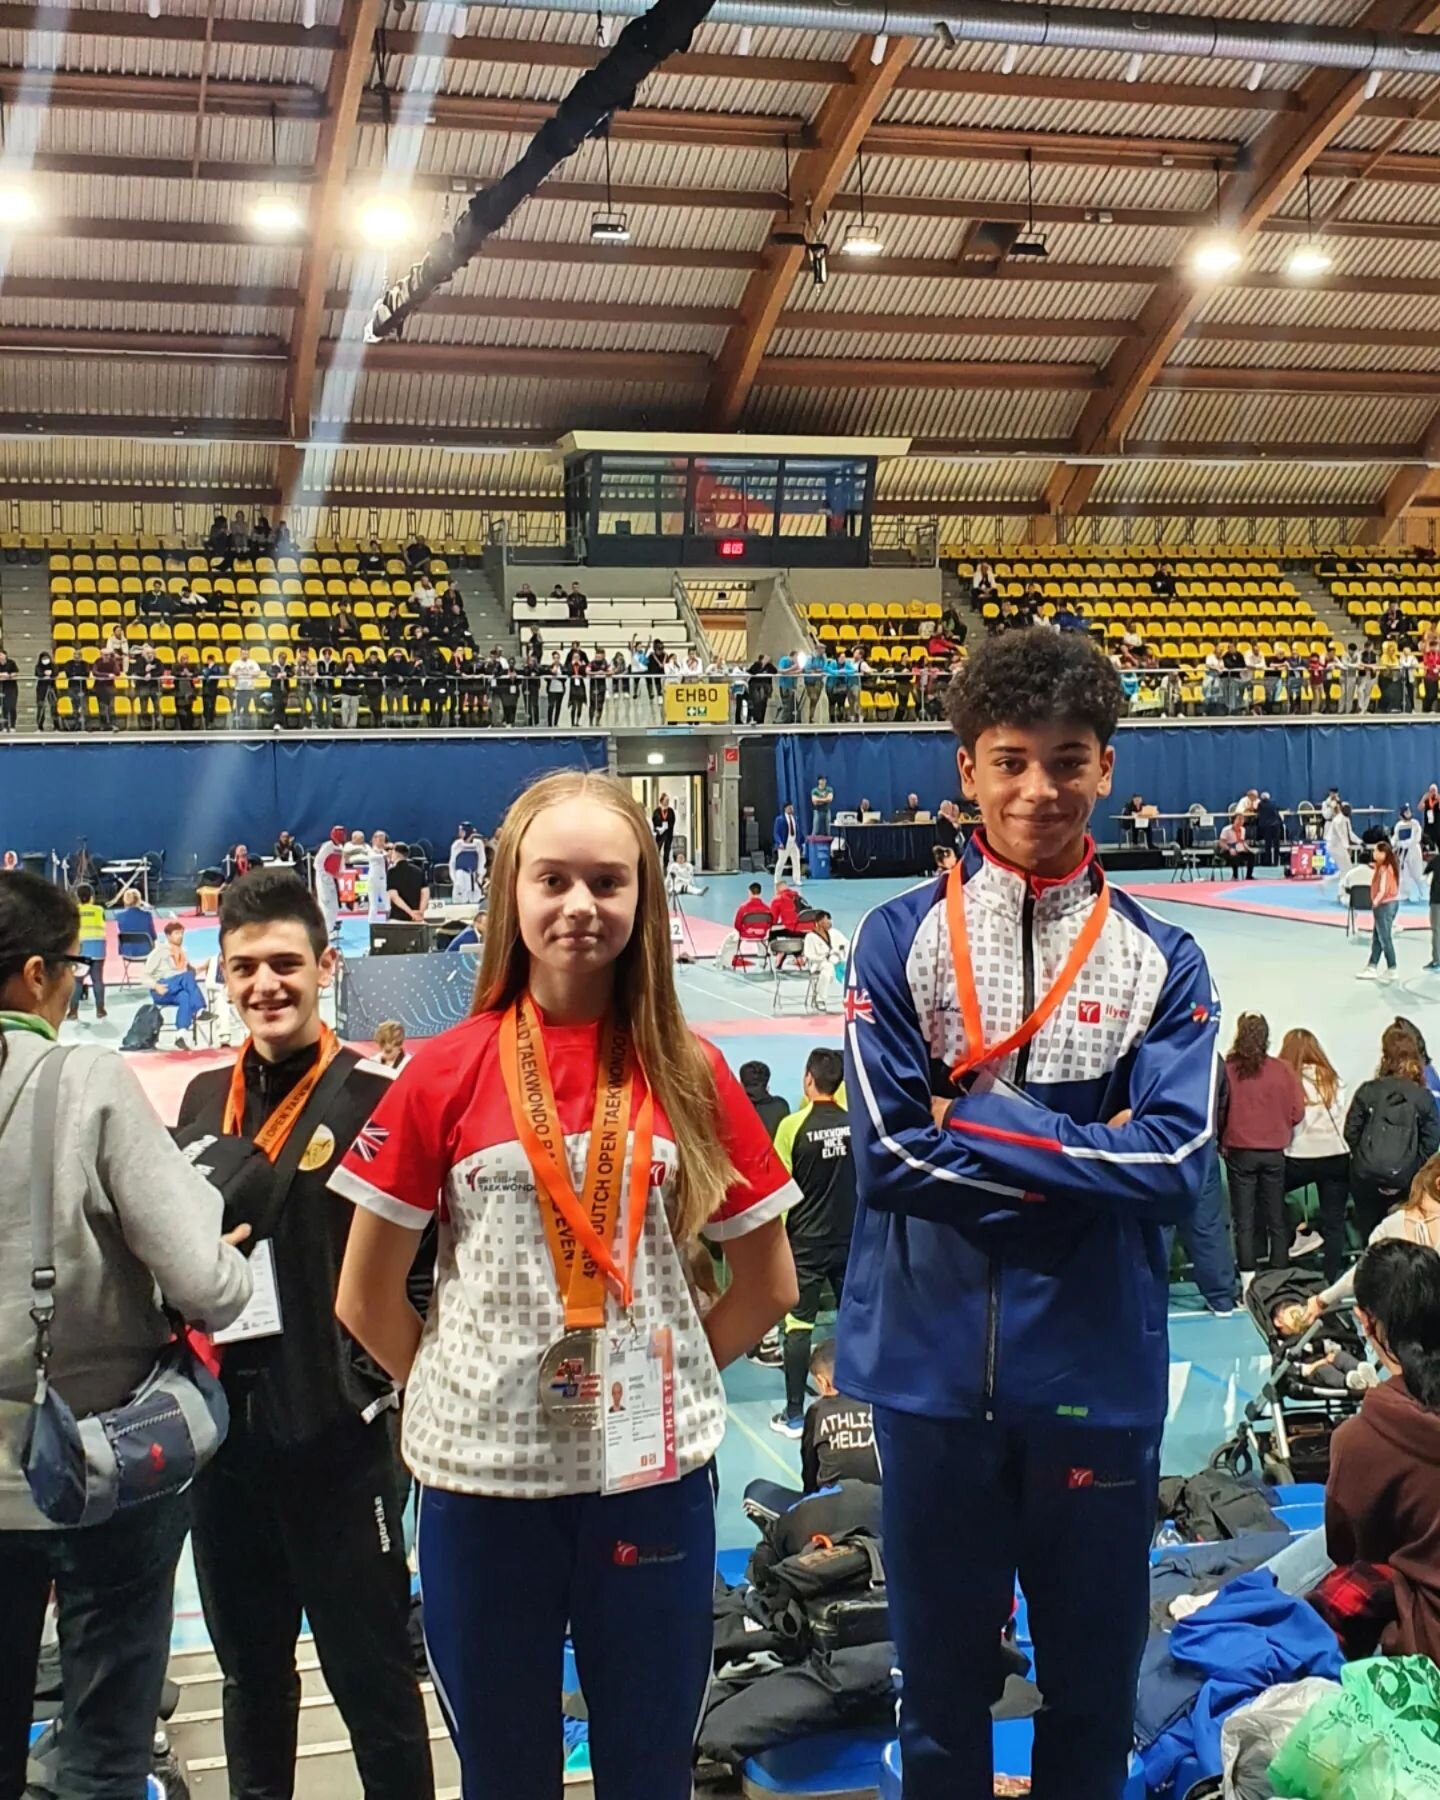 Small team here at Dutch Open 2022. Coming back with a silver medal for @darceystenzeltkd #teamilyeo 
.
.
.
.
.
.
.
.
.
#taekwondo #chiswick #chiswickparents